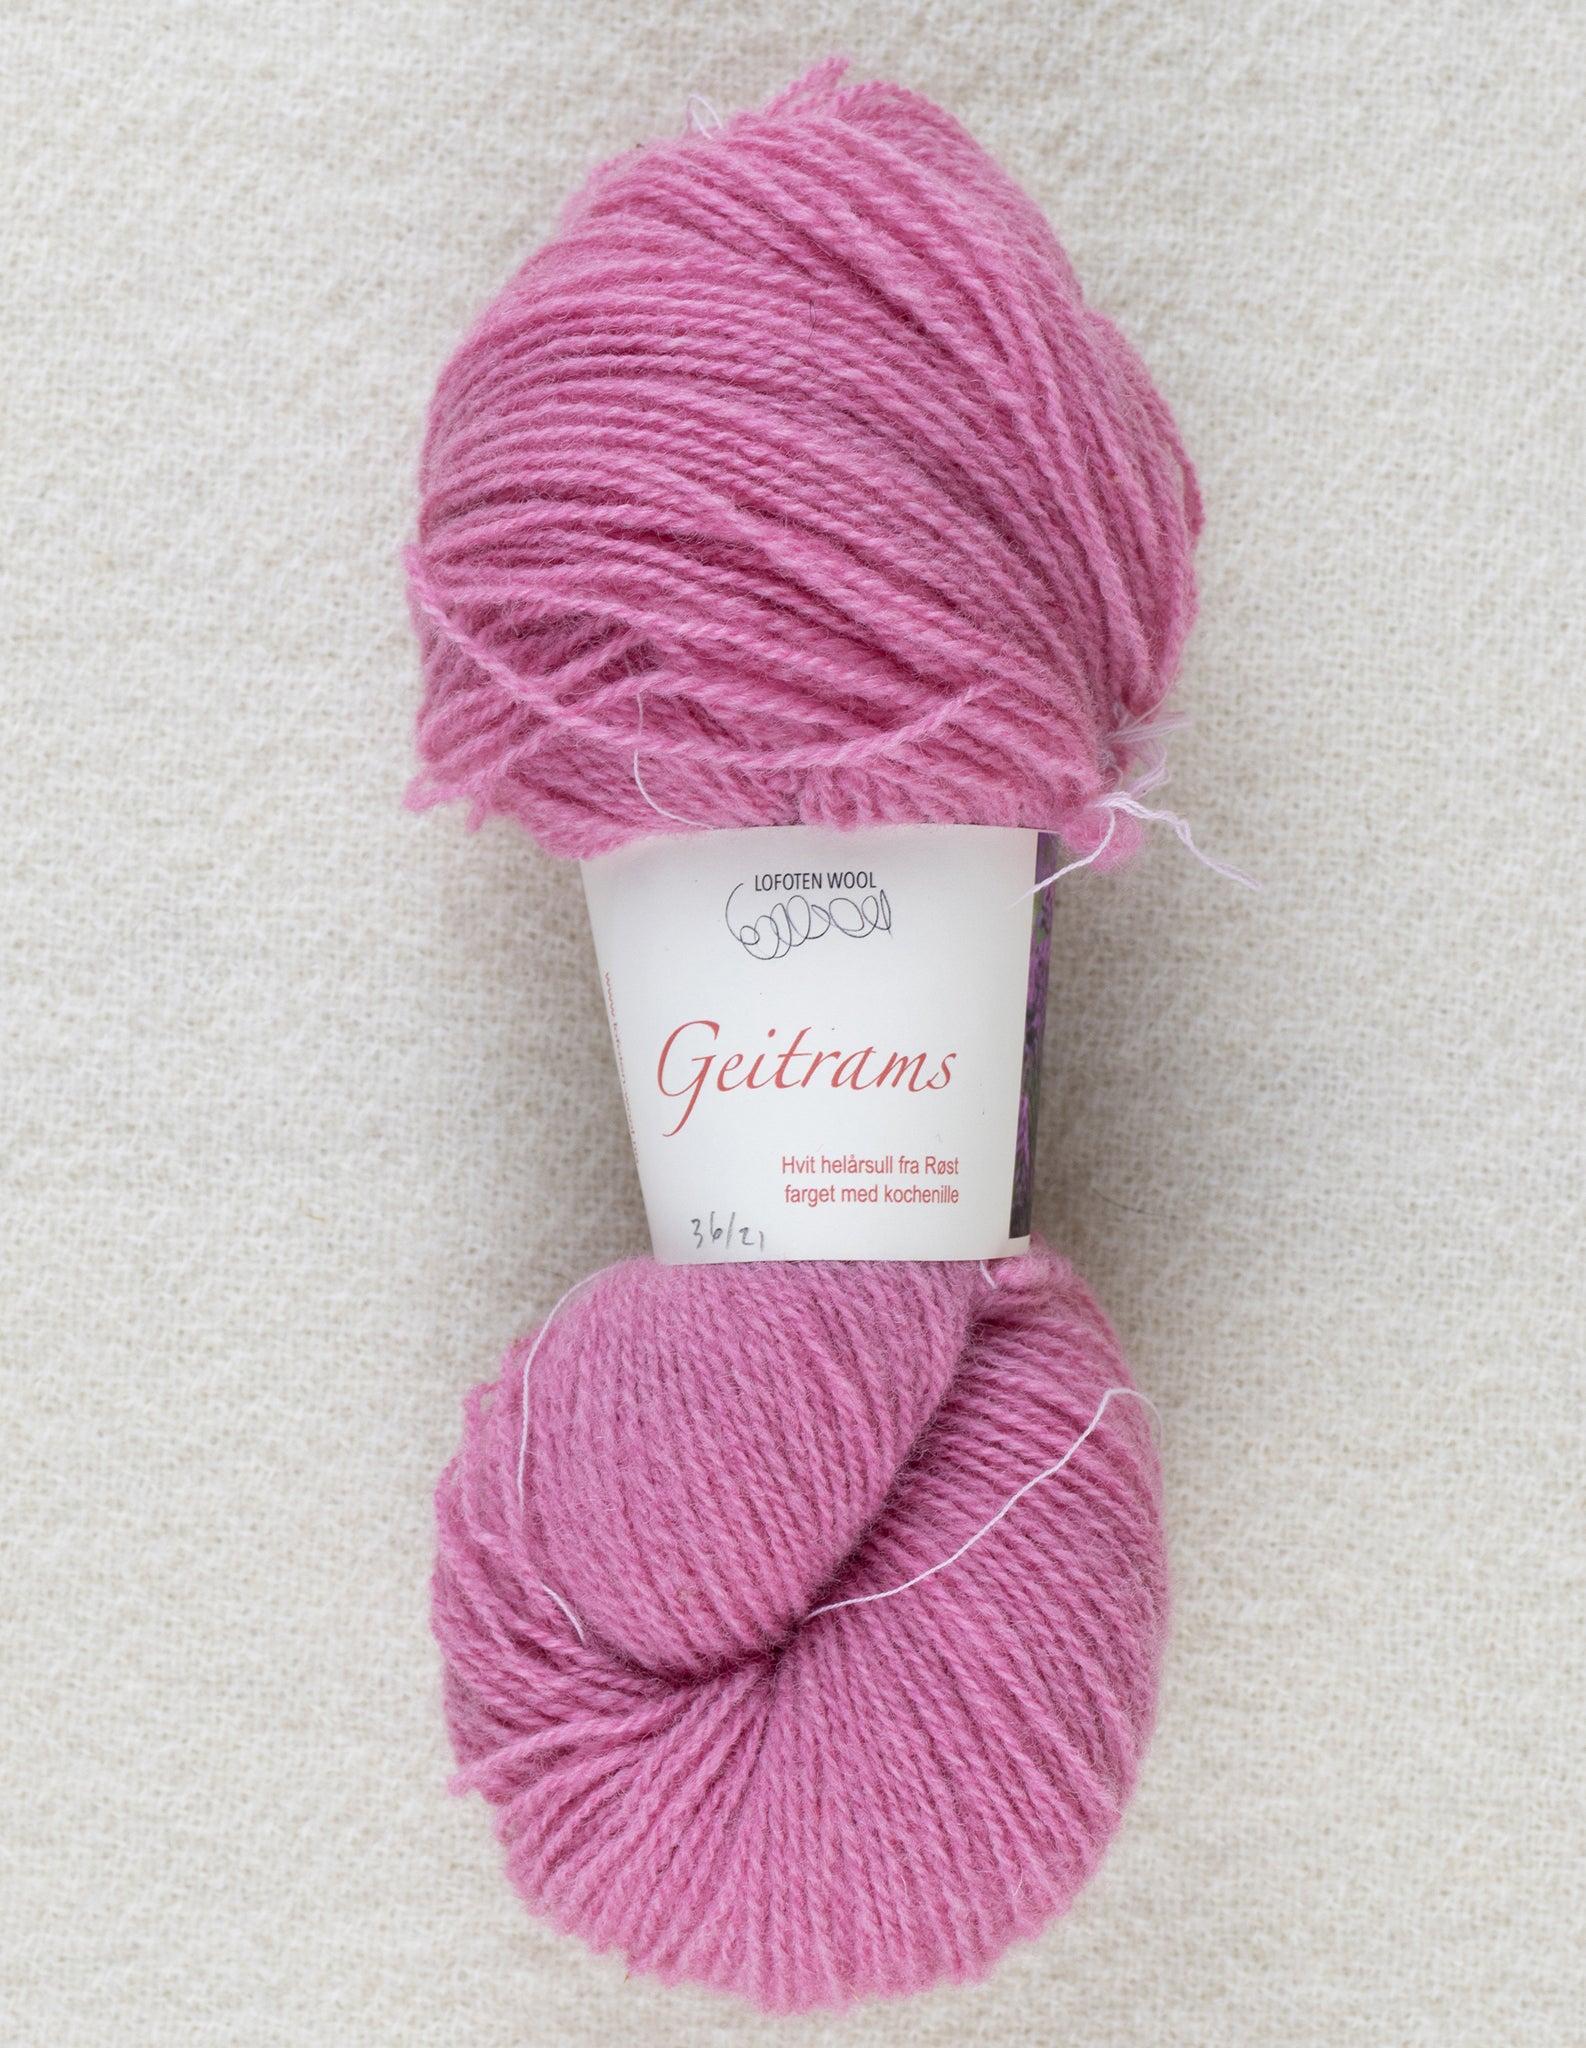 Geitrams 2 ply, 50/100g, (Fireweed)